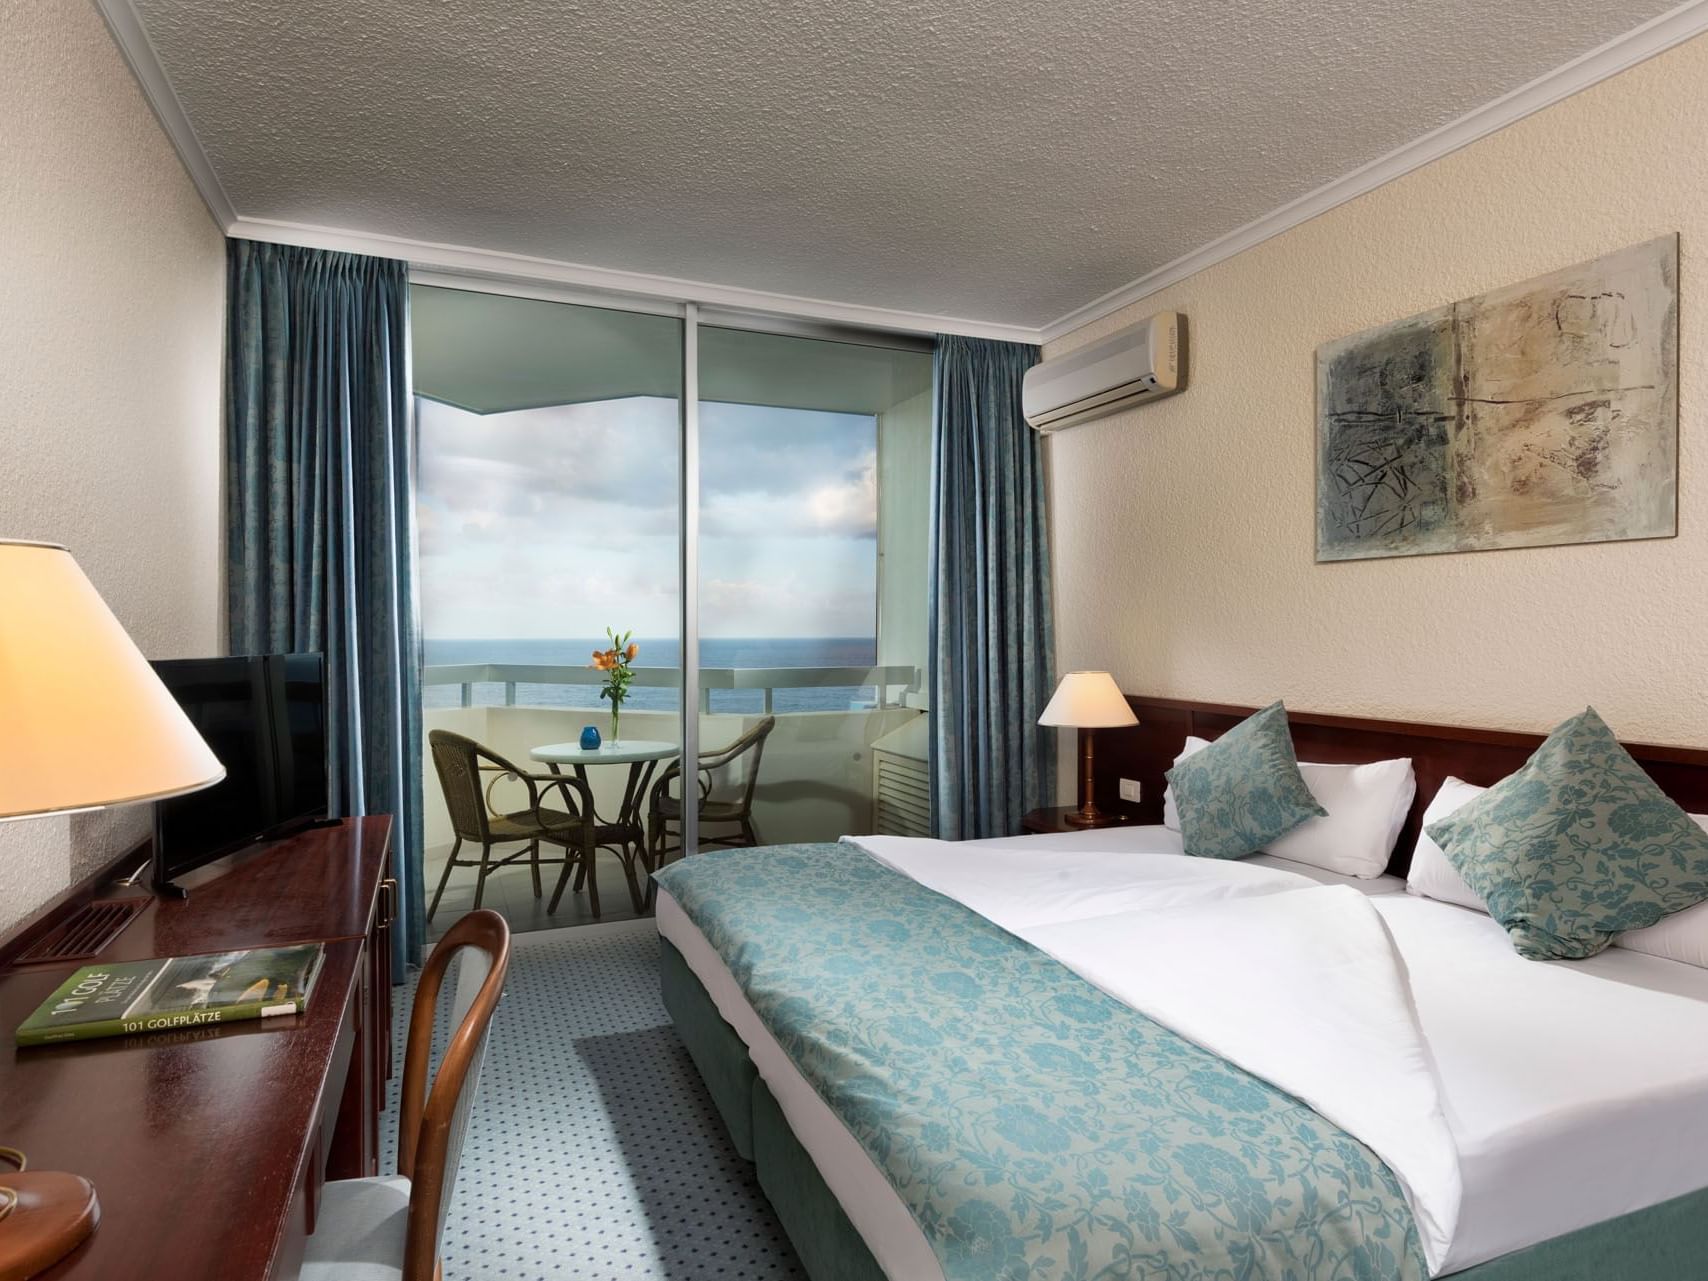 Standard room with sea view at Precise Resort Tenerife